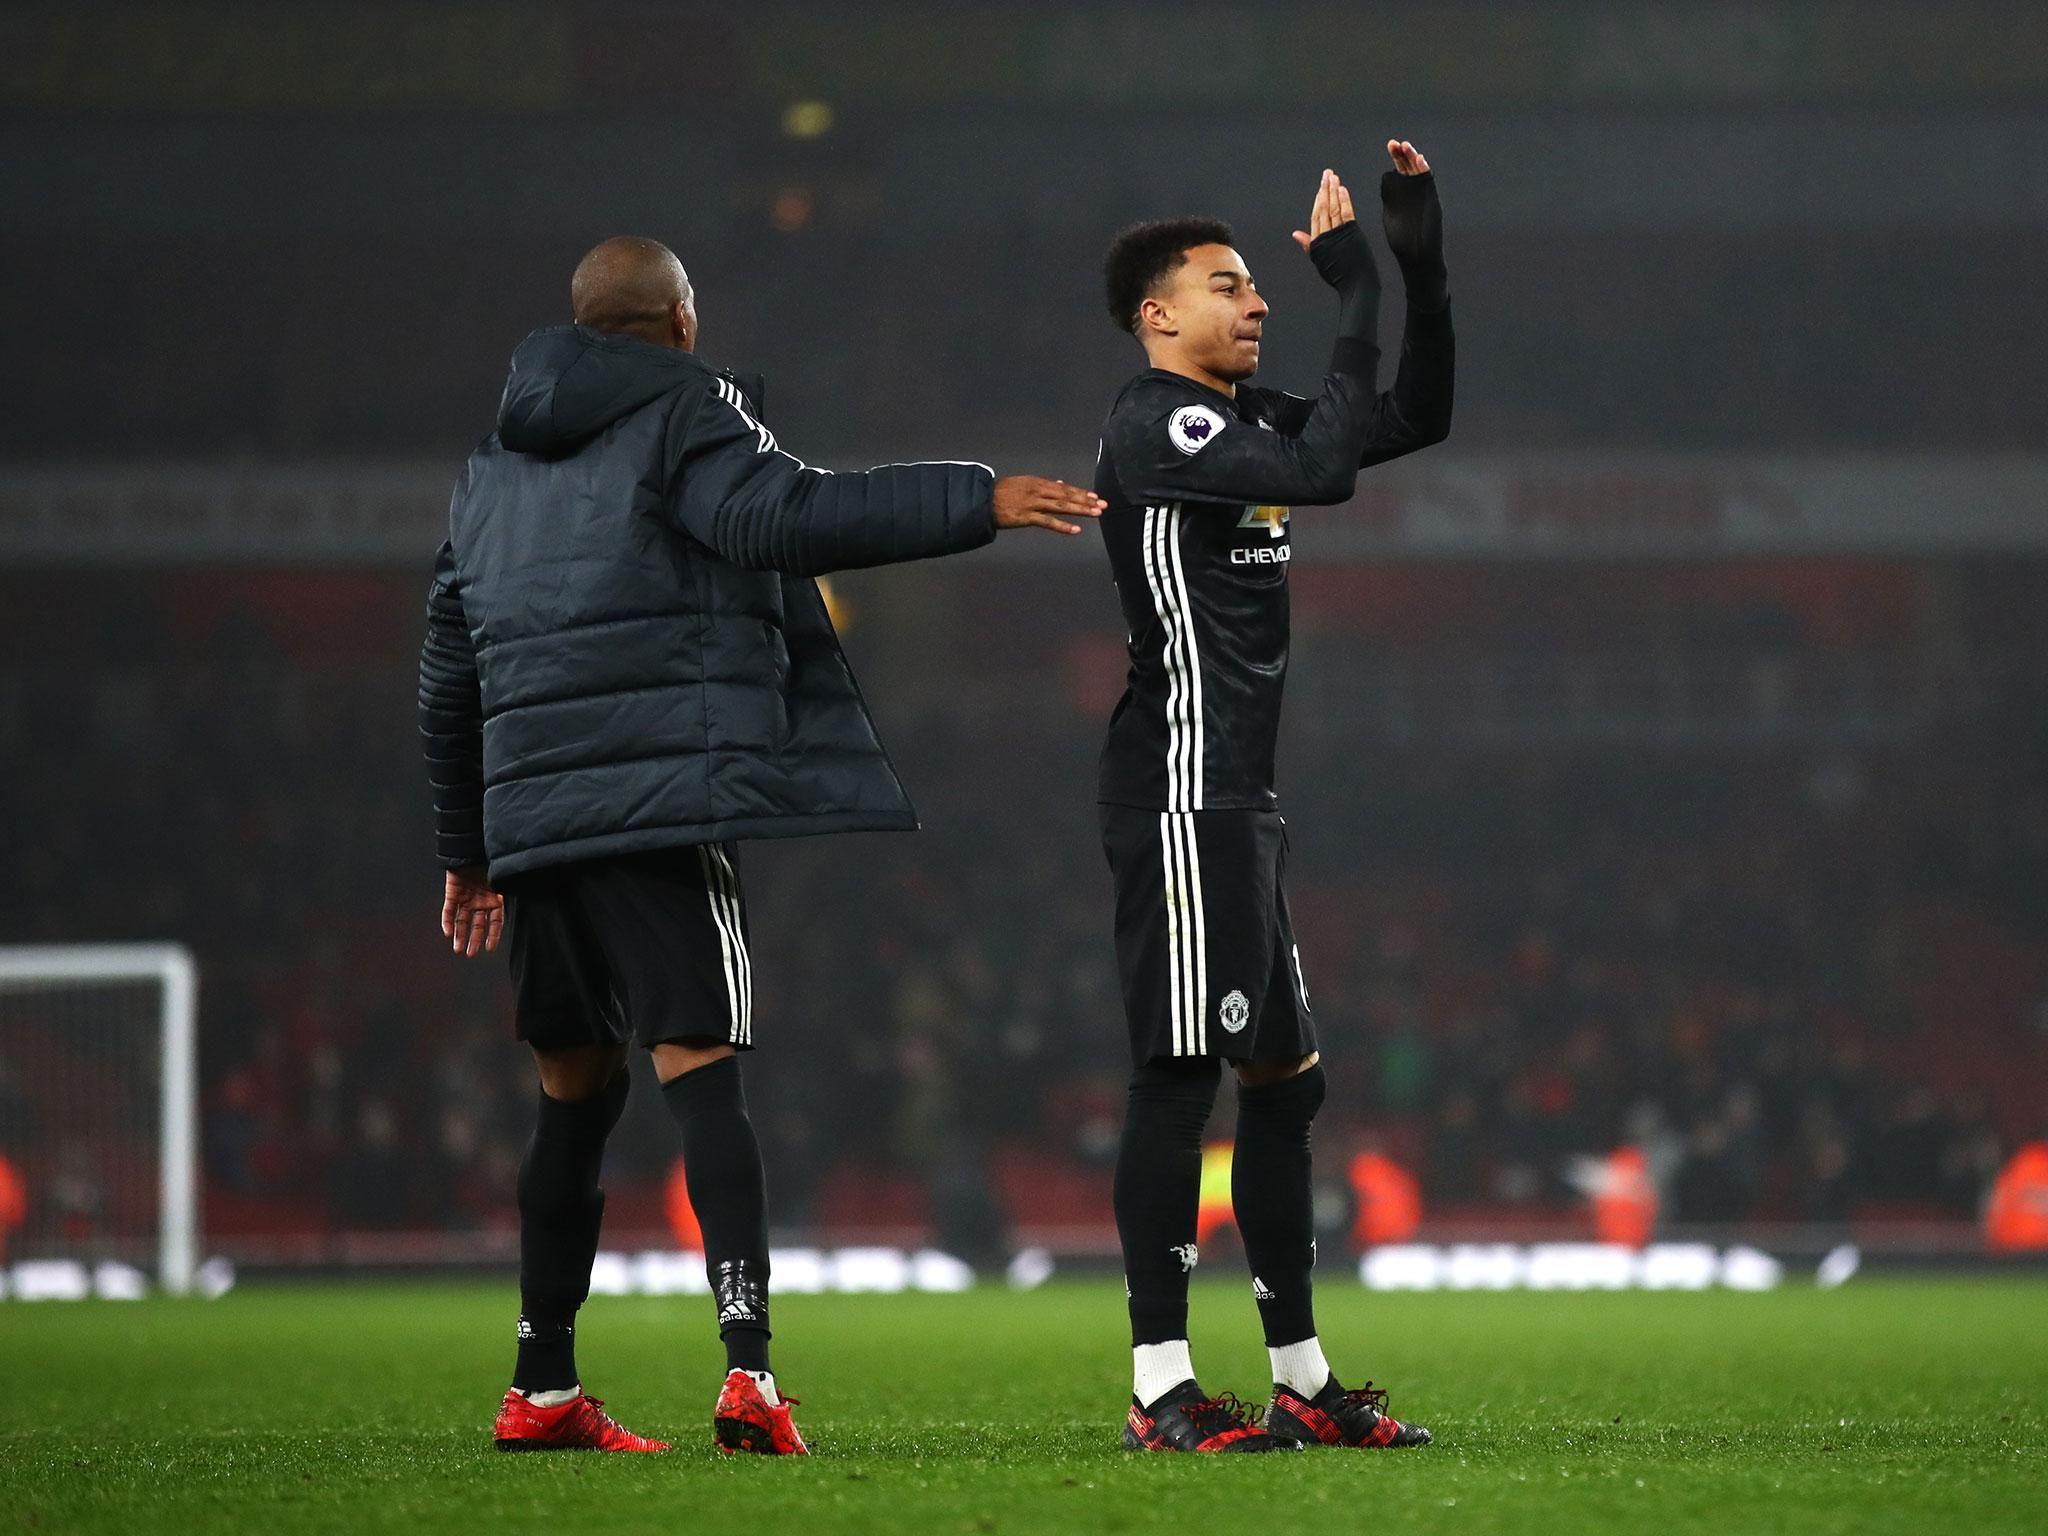 Lingard has stepped up in the absence of Mkhitaryan, and is the type